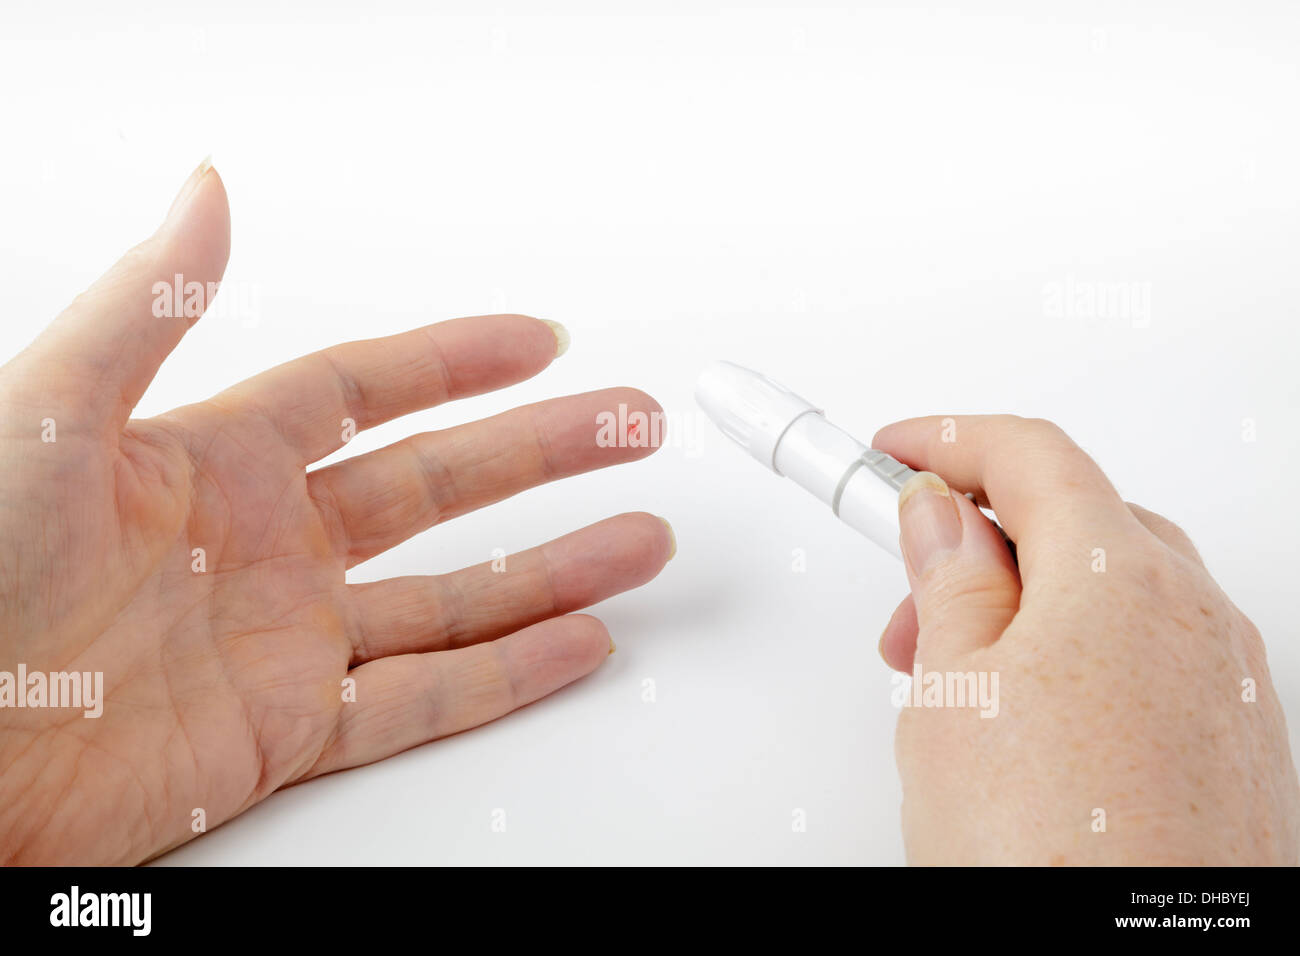 Diabetic blood glucose test, using a stick to puncture finger Stock Photo